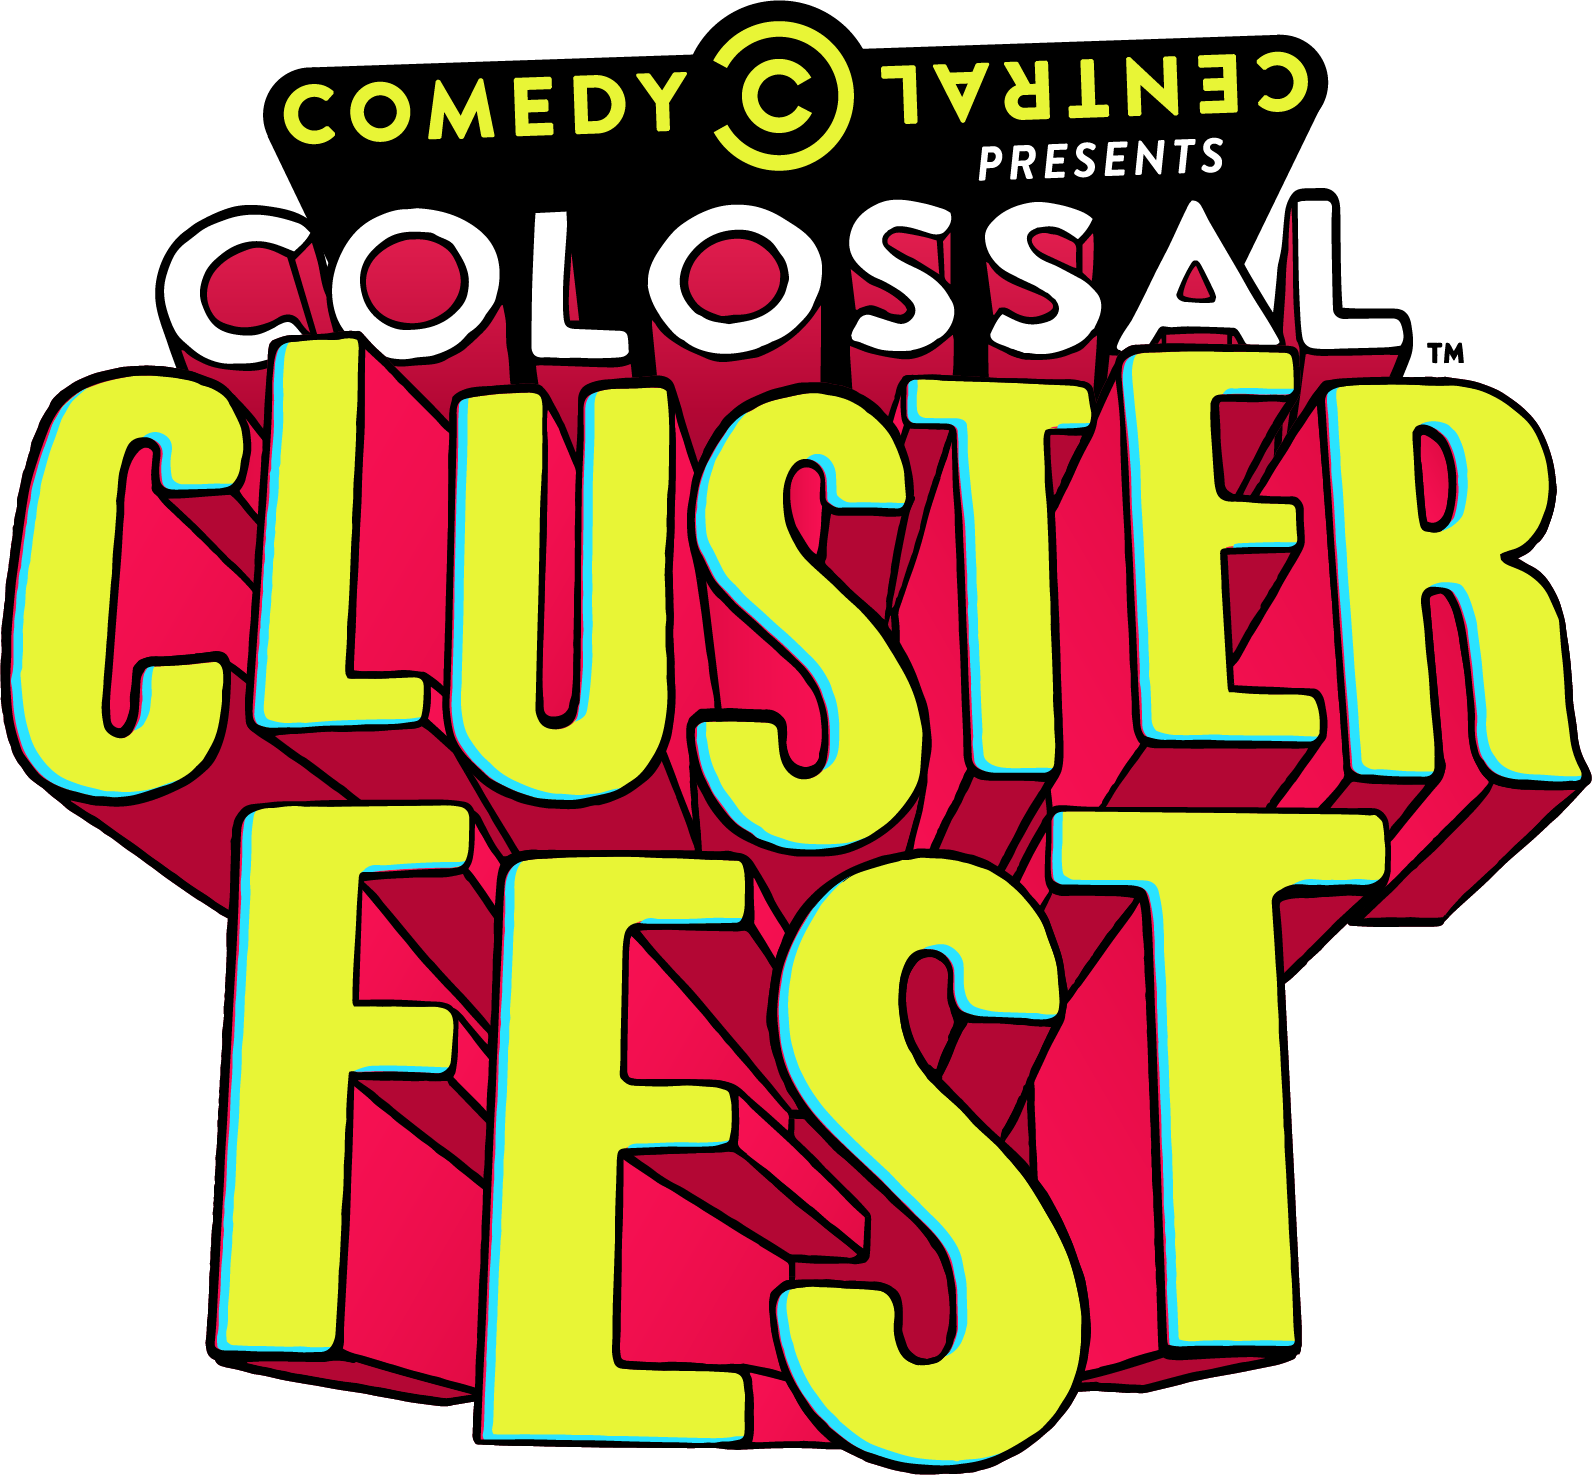 Colossal Cluster Fest Comedy Event Logo PNG image